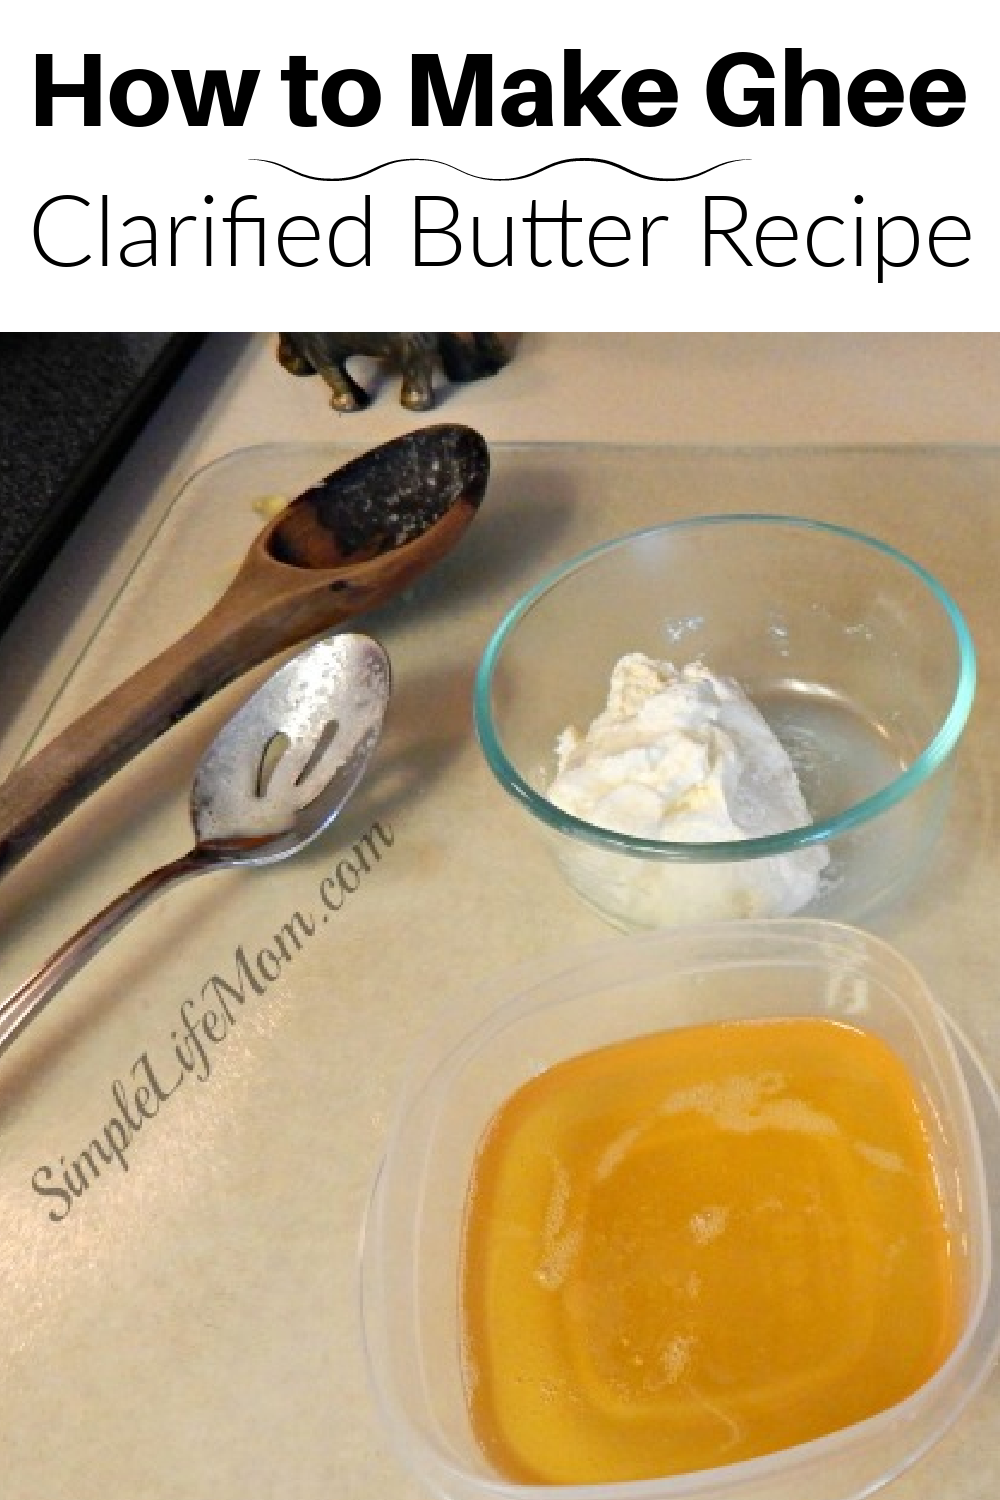 https://simplelifemom.com/wp-content/uploads/2022/07/How-to-Make-Ghee-a-clarified-butter-recipe-from-Simple-Life-Mom.png